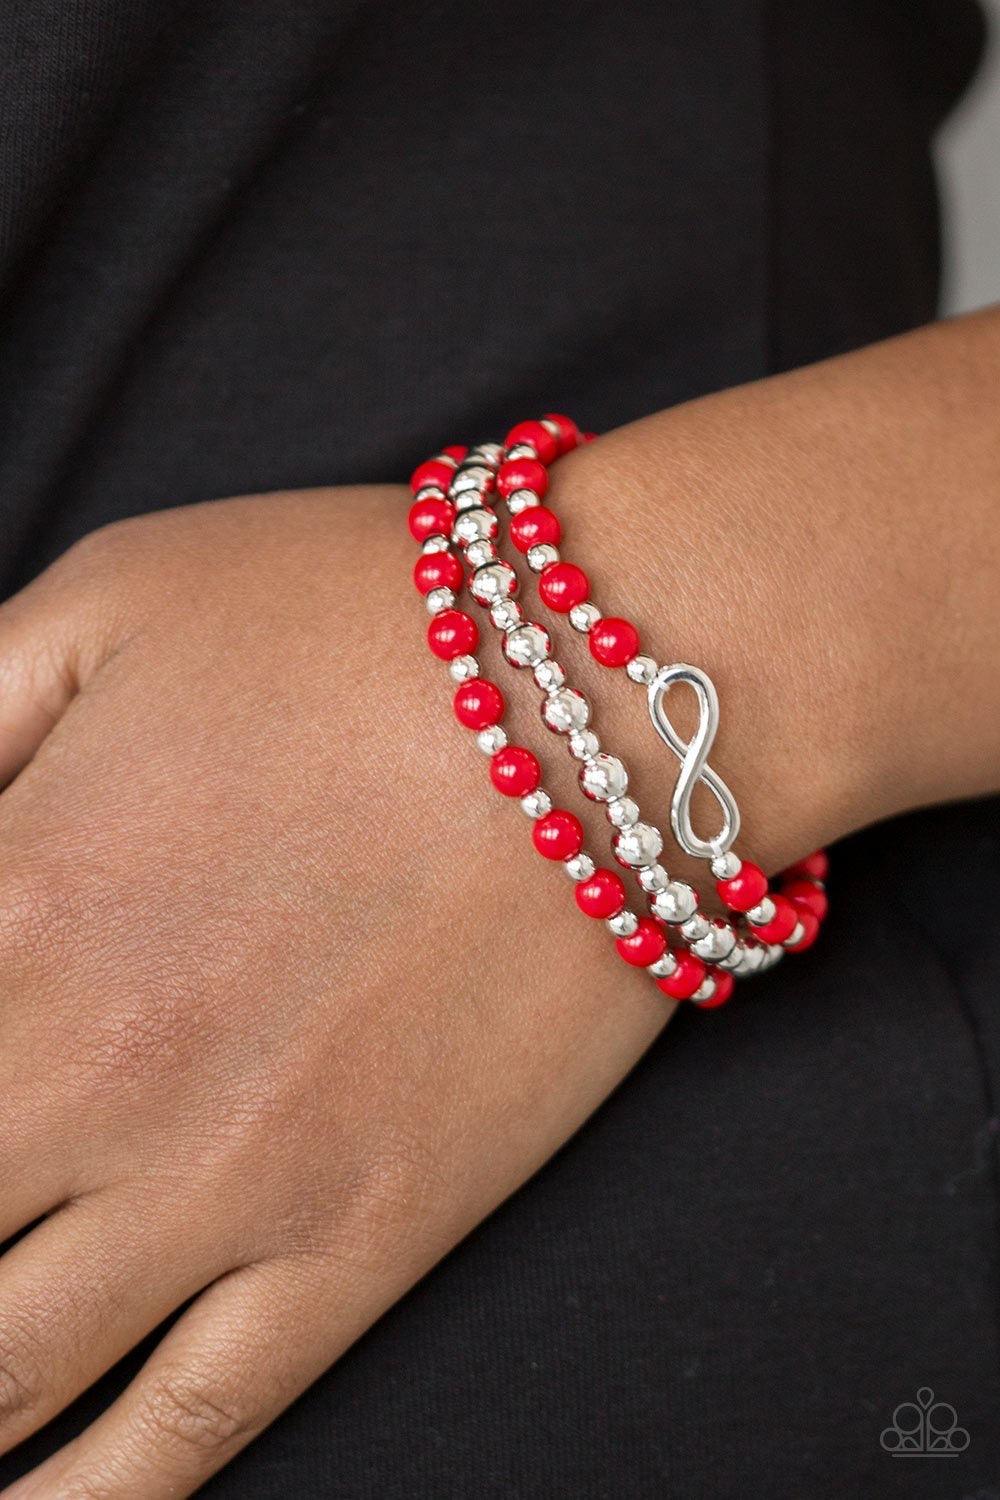 Paparazzi Accessories Immeasurably Infinite - Red Fiery red and shiny silver beads are threaded along stretchy bands, creating colorful layers around the wrist. A dainty silver infinity charm adorns one strand for a whimsical finish. Sold as one set of th